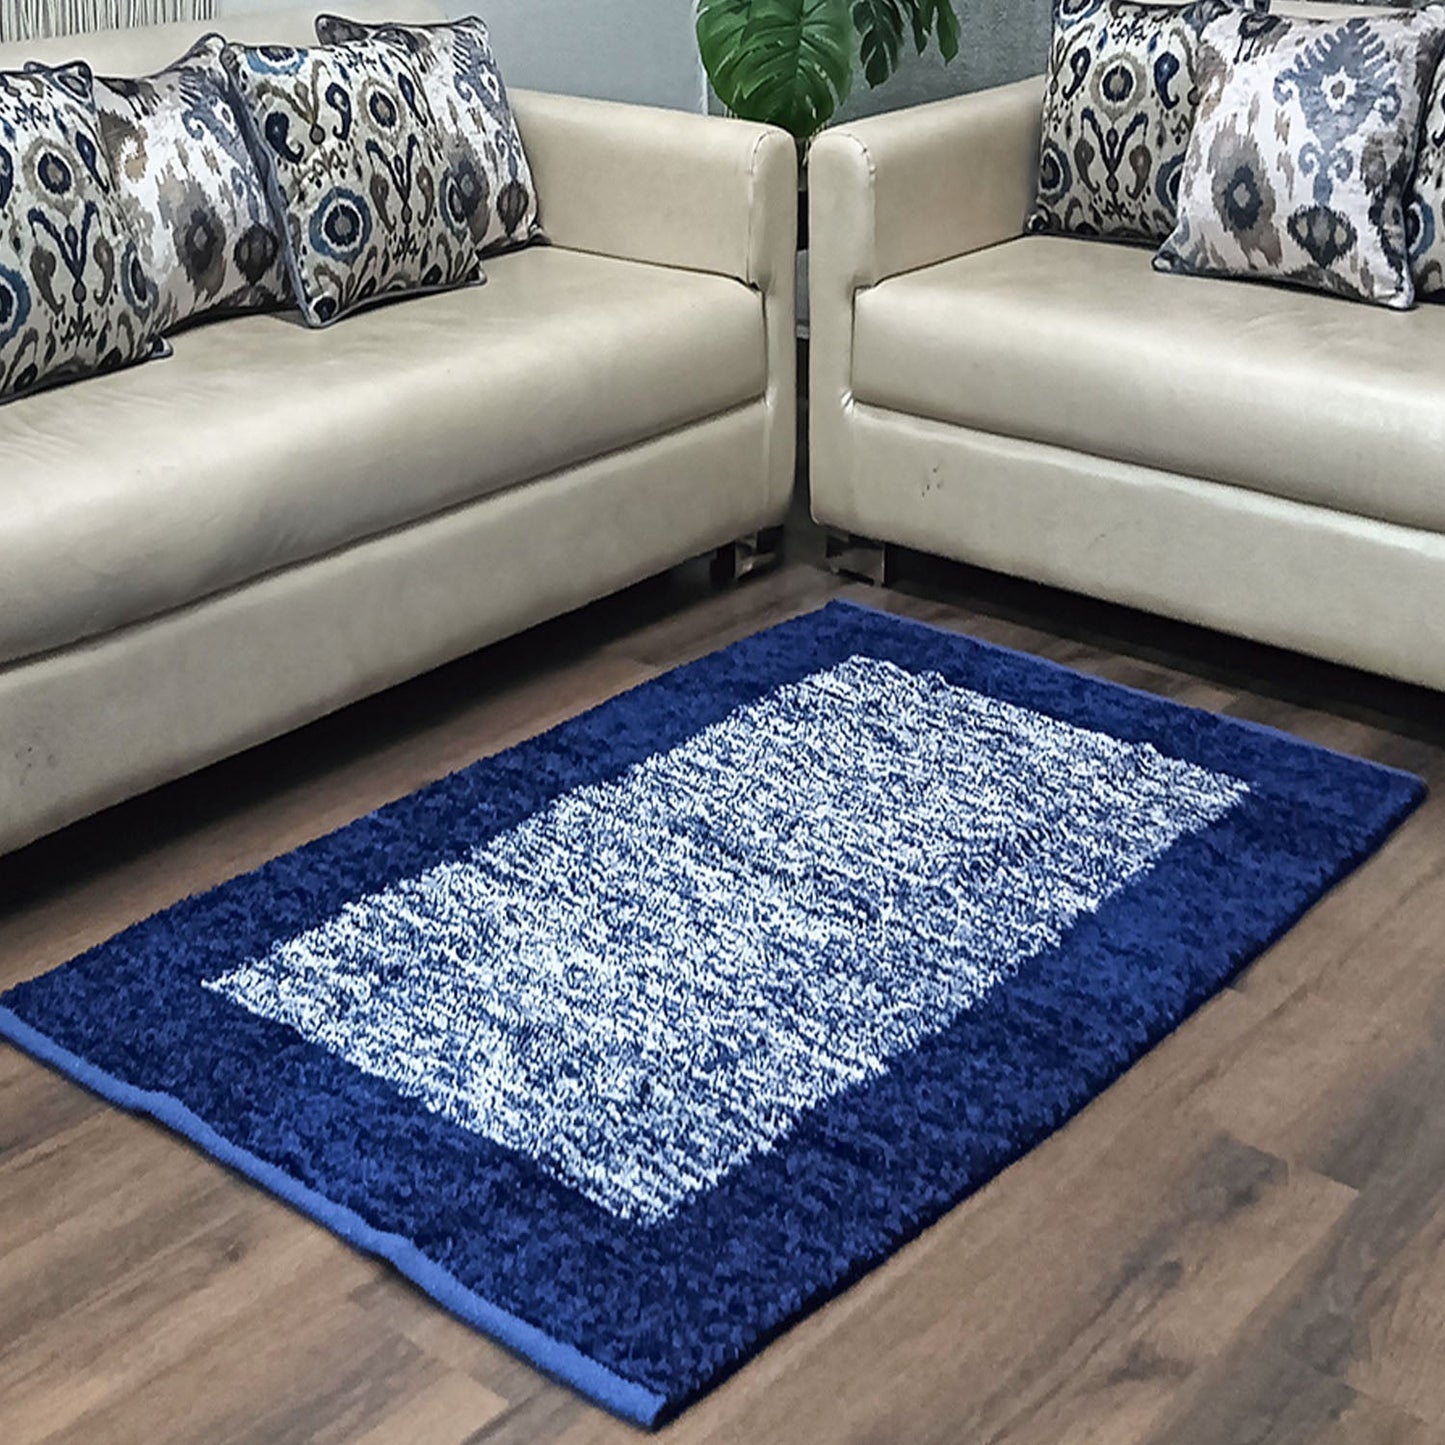 Avioni Handloom Cut Shuttle Rugs by Master Artisans | Feather like Luxurious Silk Soft Touch | Home Washable | Blue and White | Reversible - 3 feet x 5 feet (~90 cm x 150 cm)